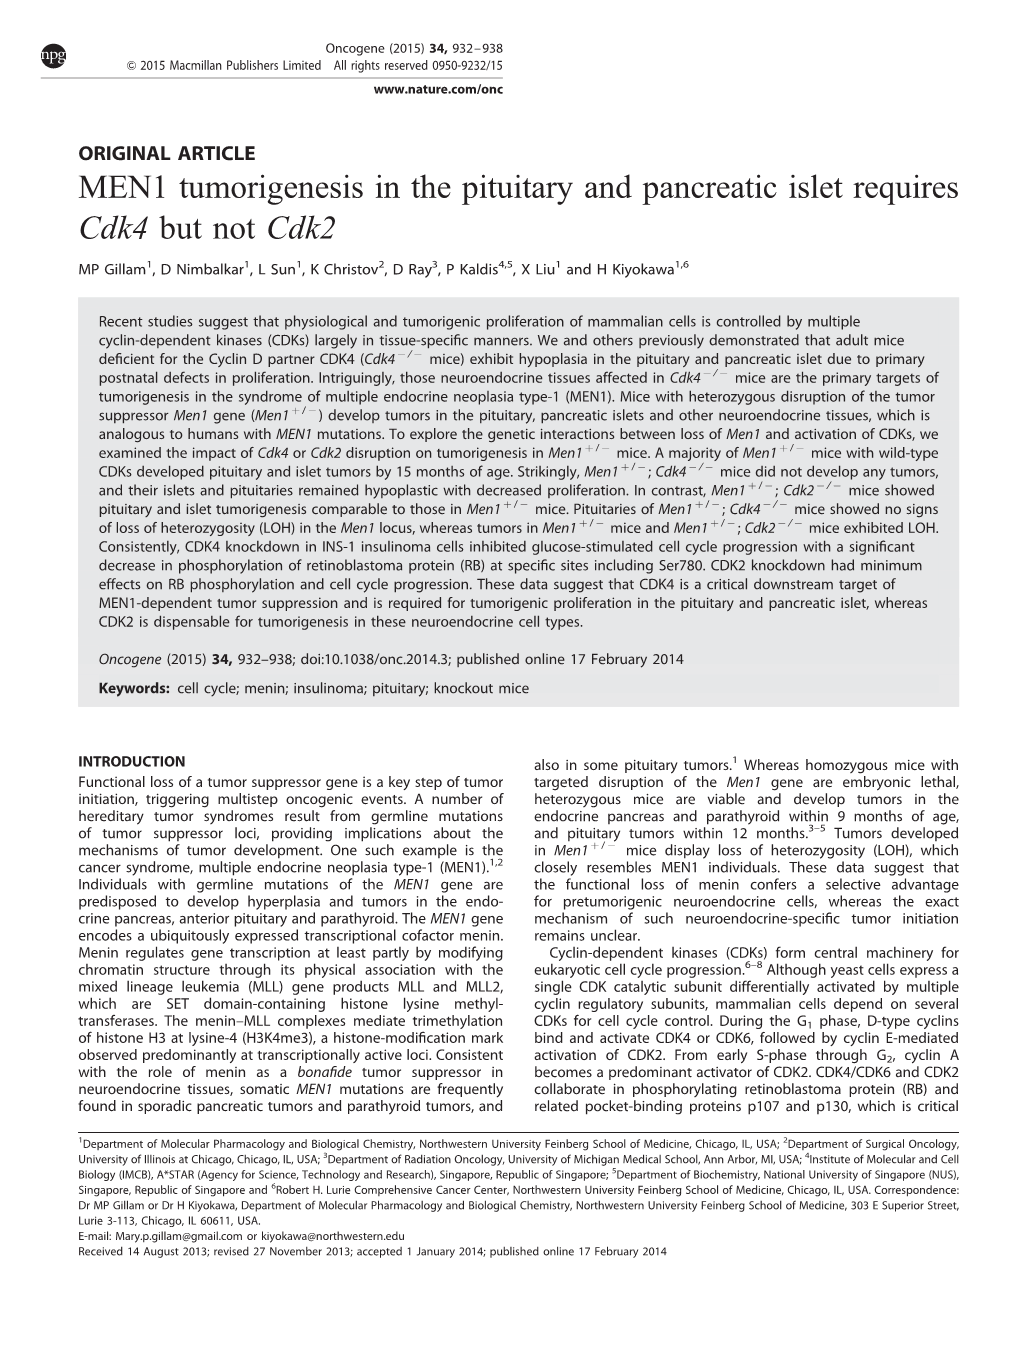 MEN1 Tumorigenesis in the Pituitary and Pancreatic Islet Requires Cdk4 but Not Cdk2